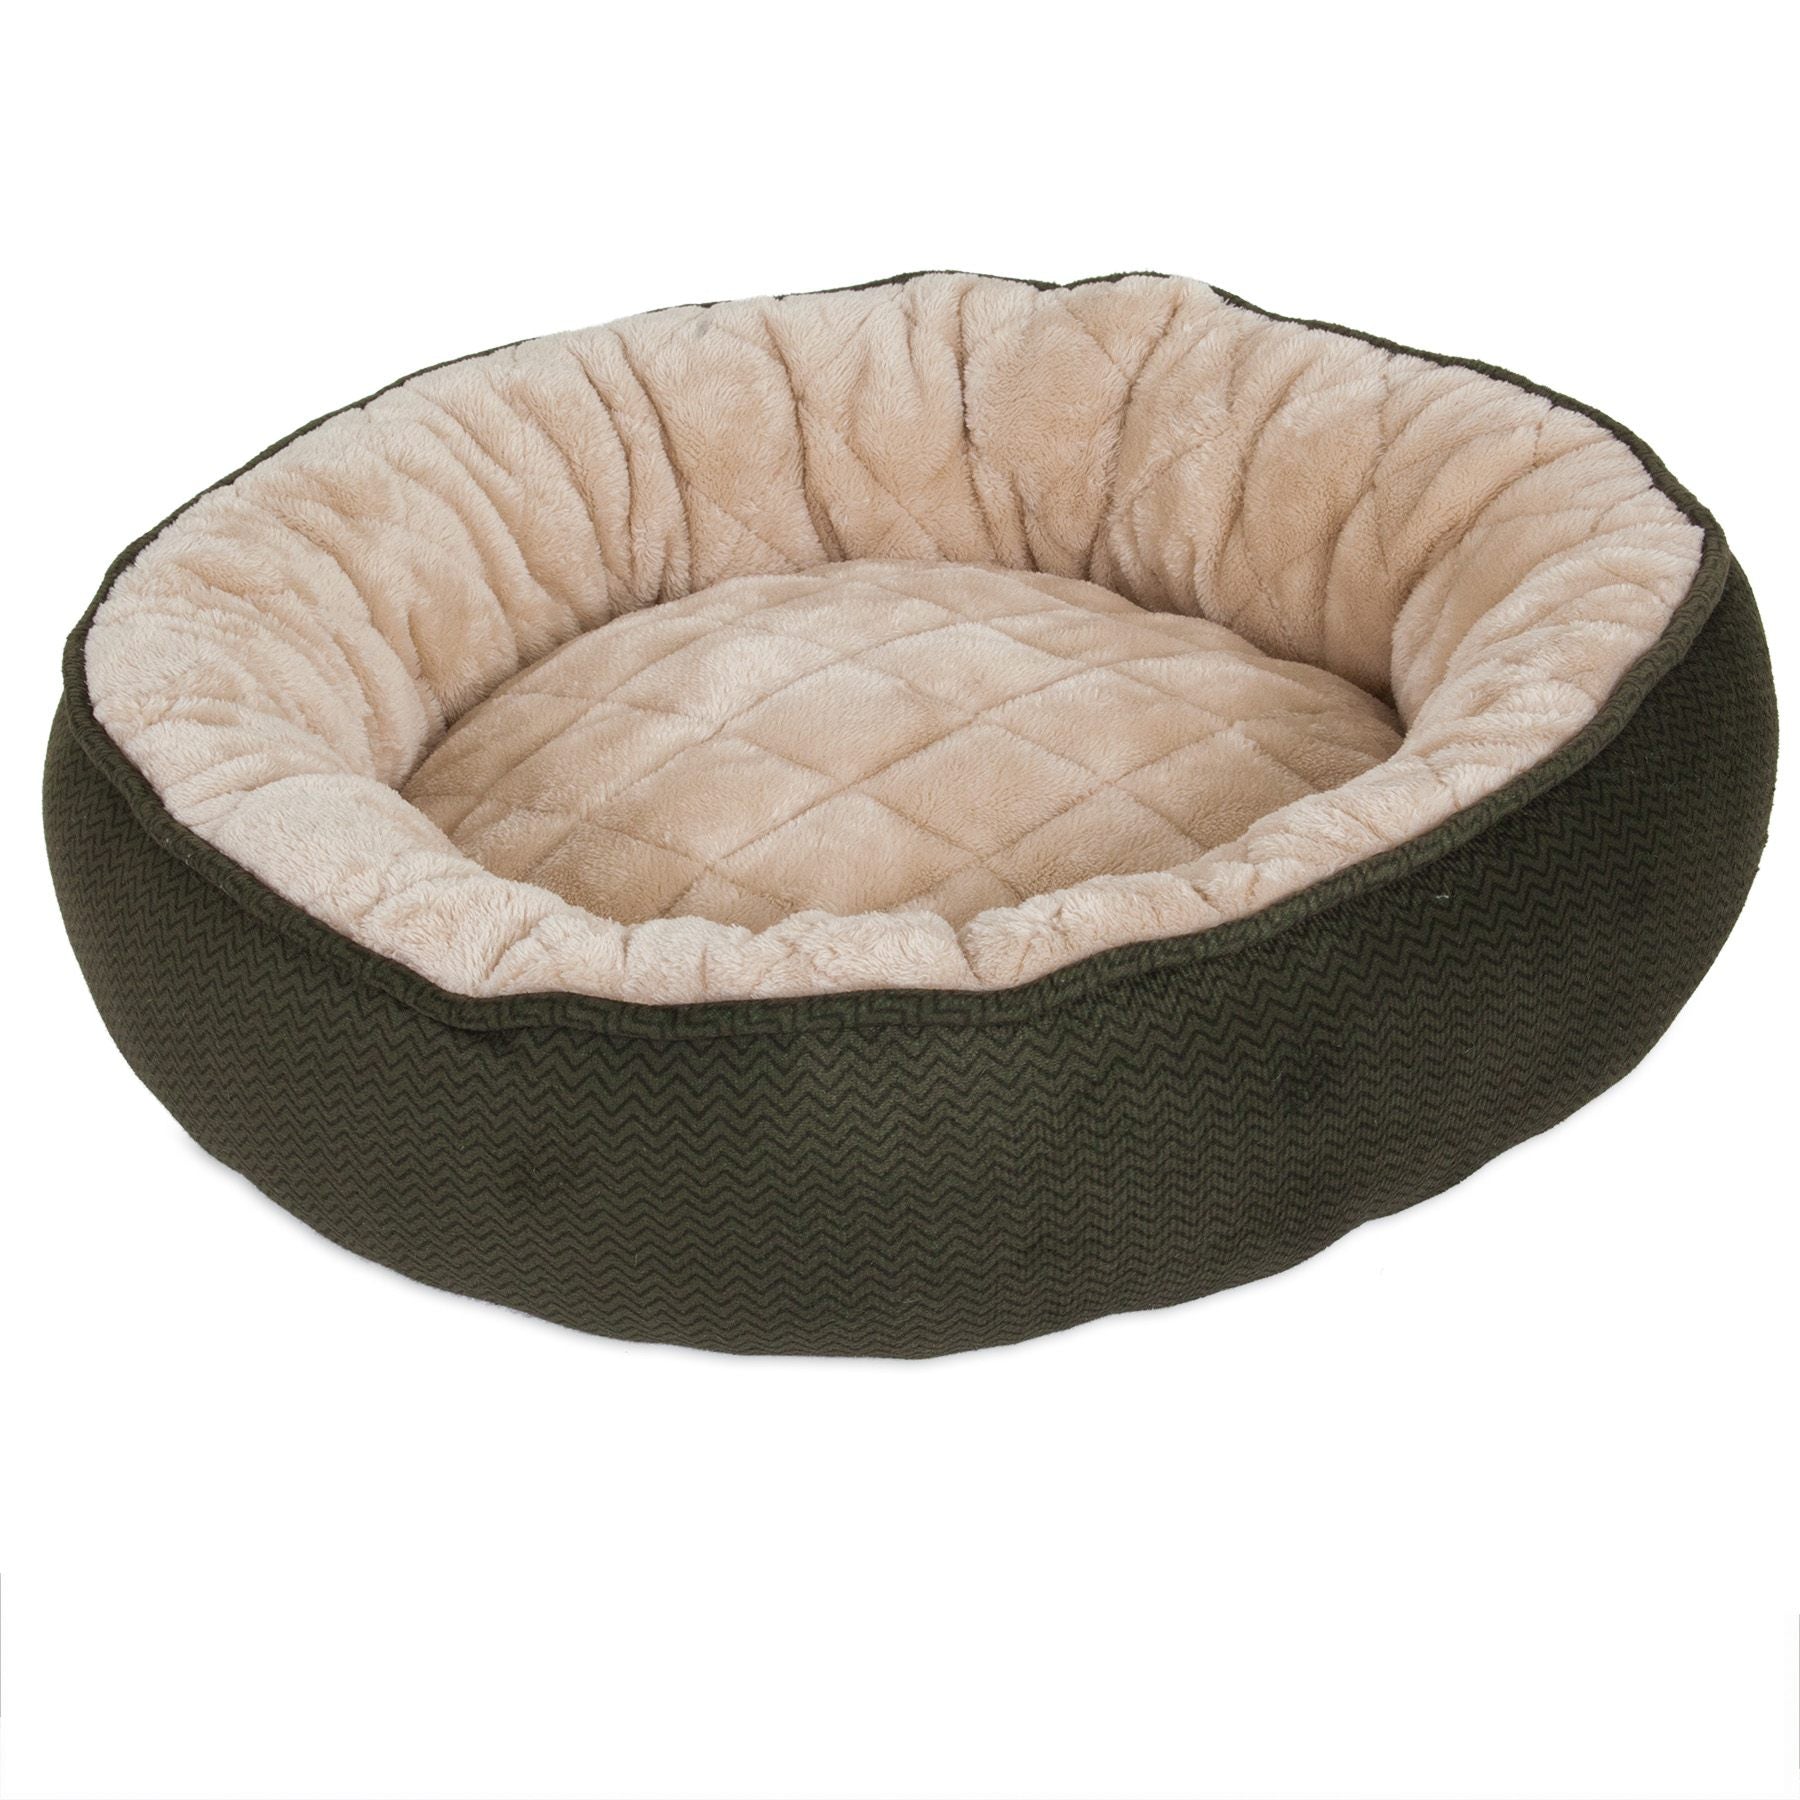 Aspen Pet Round Quilted Lounger